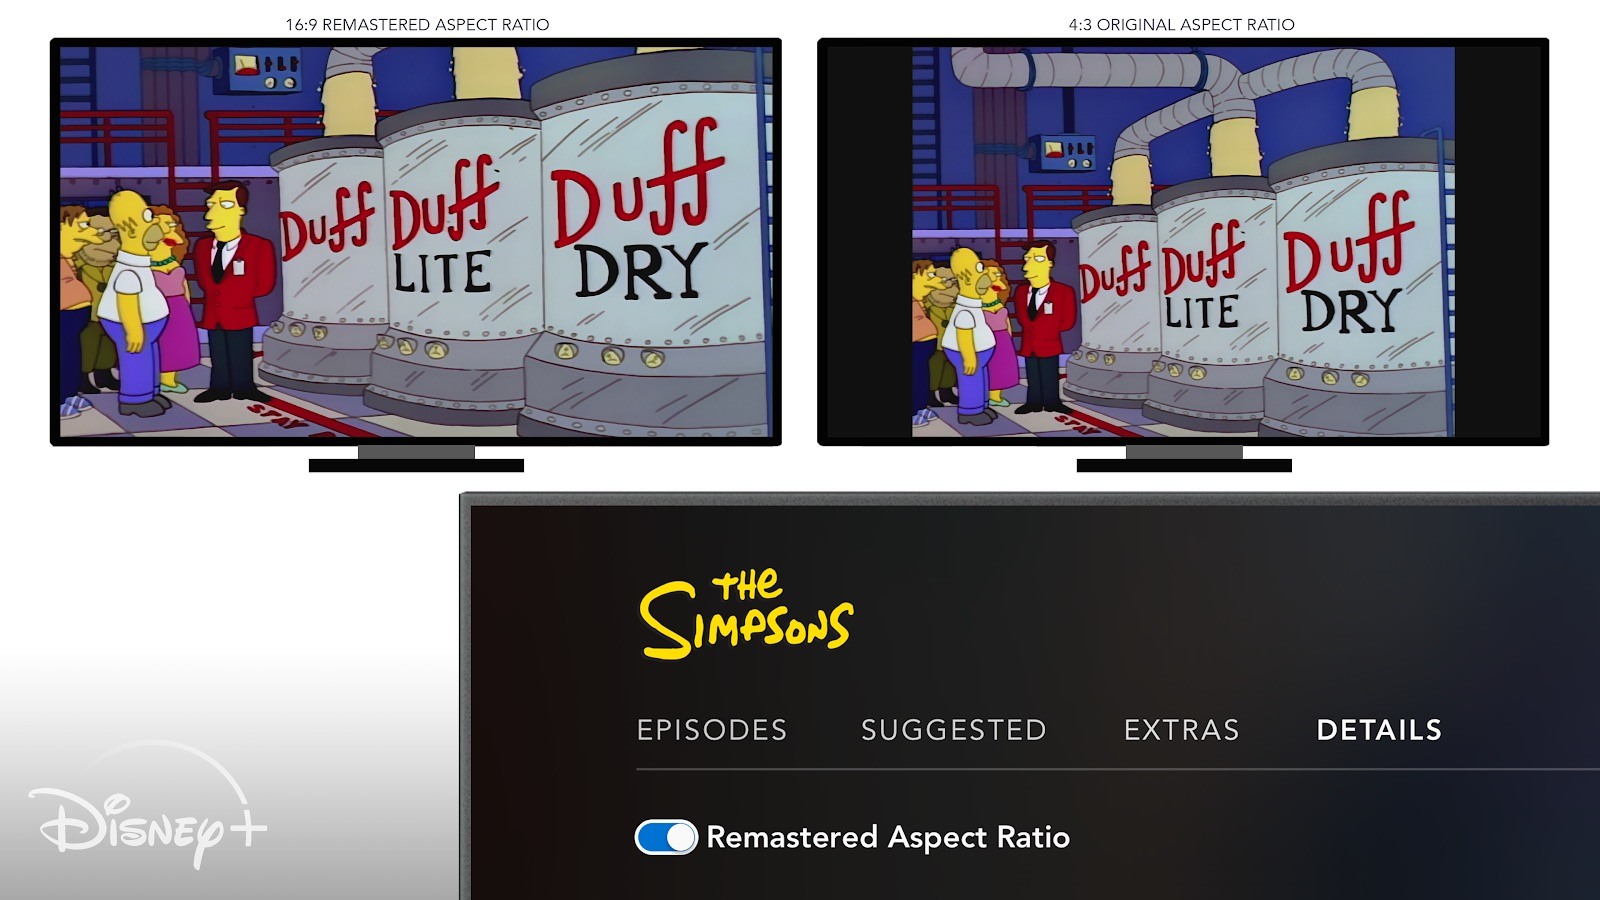 Disney+ Adds Option to View Older Simpsons Episodes in Original 4:3 Format